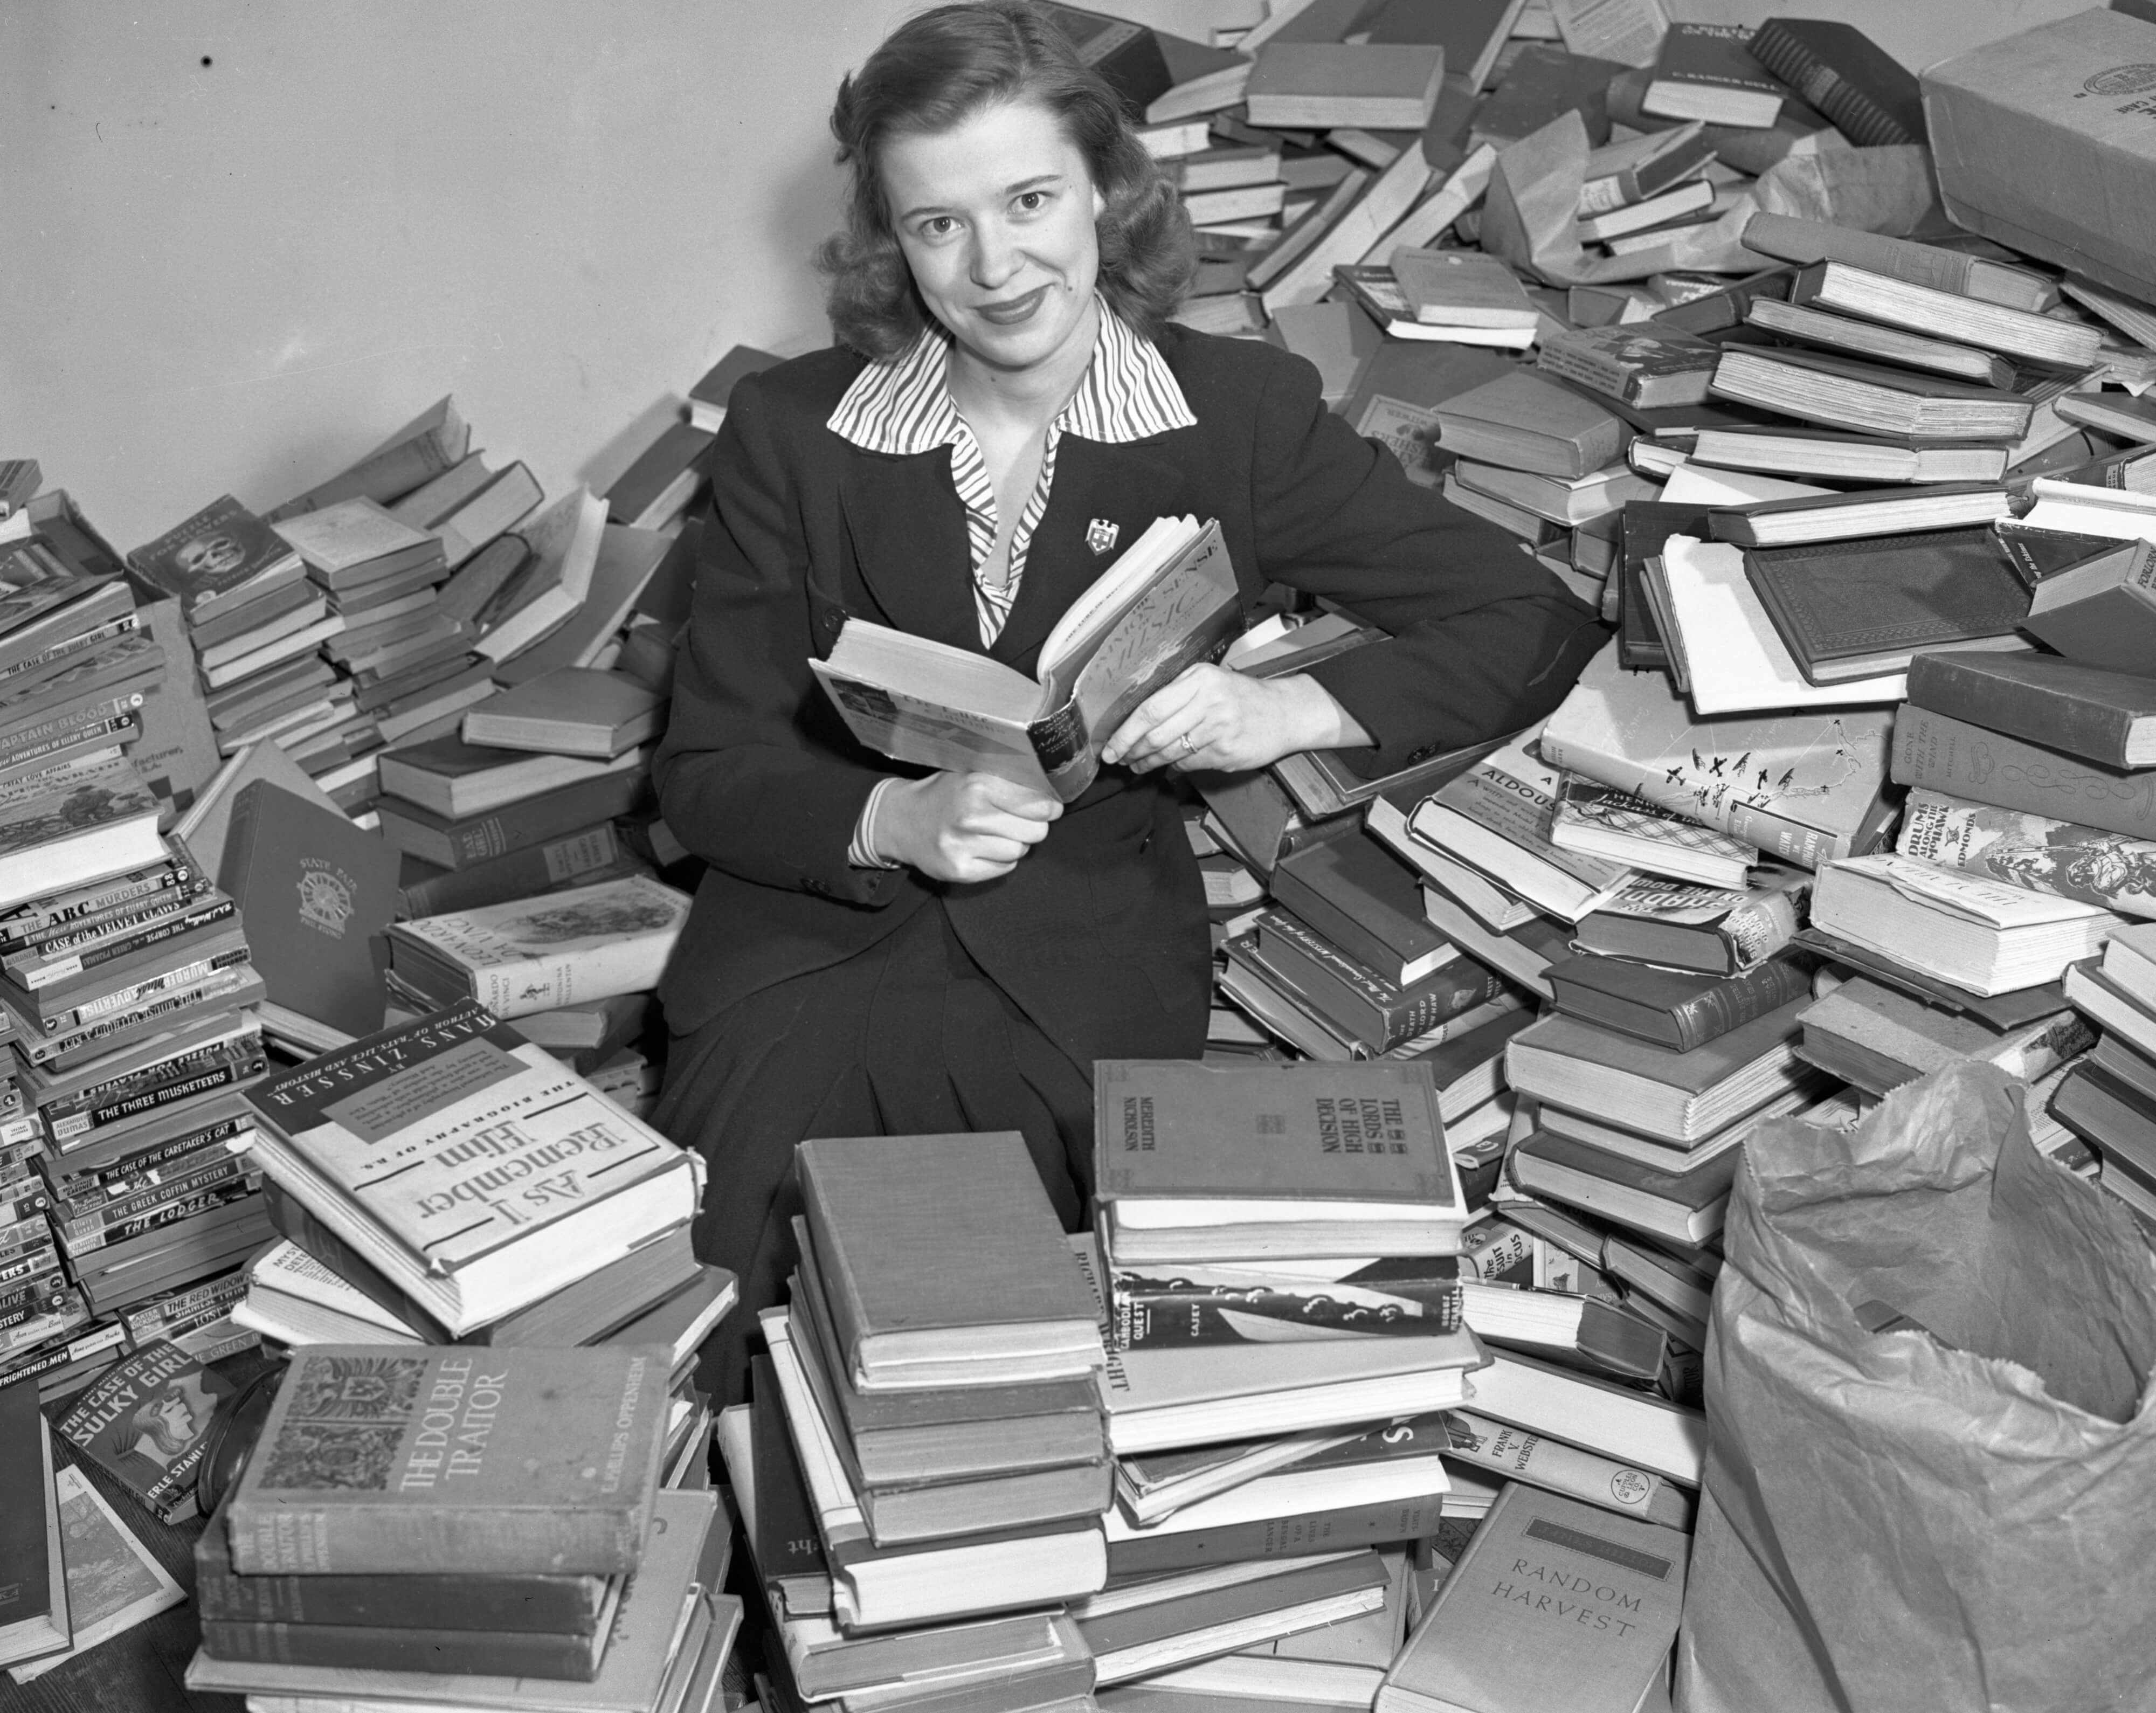 World War 2 librarian with donated books